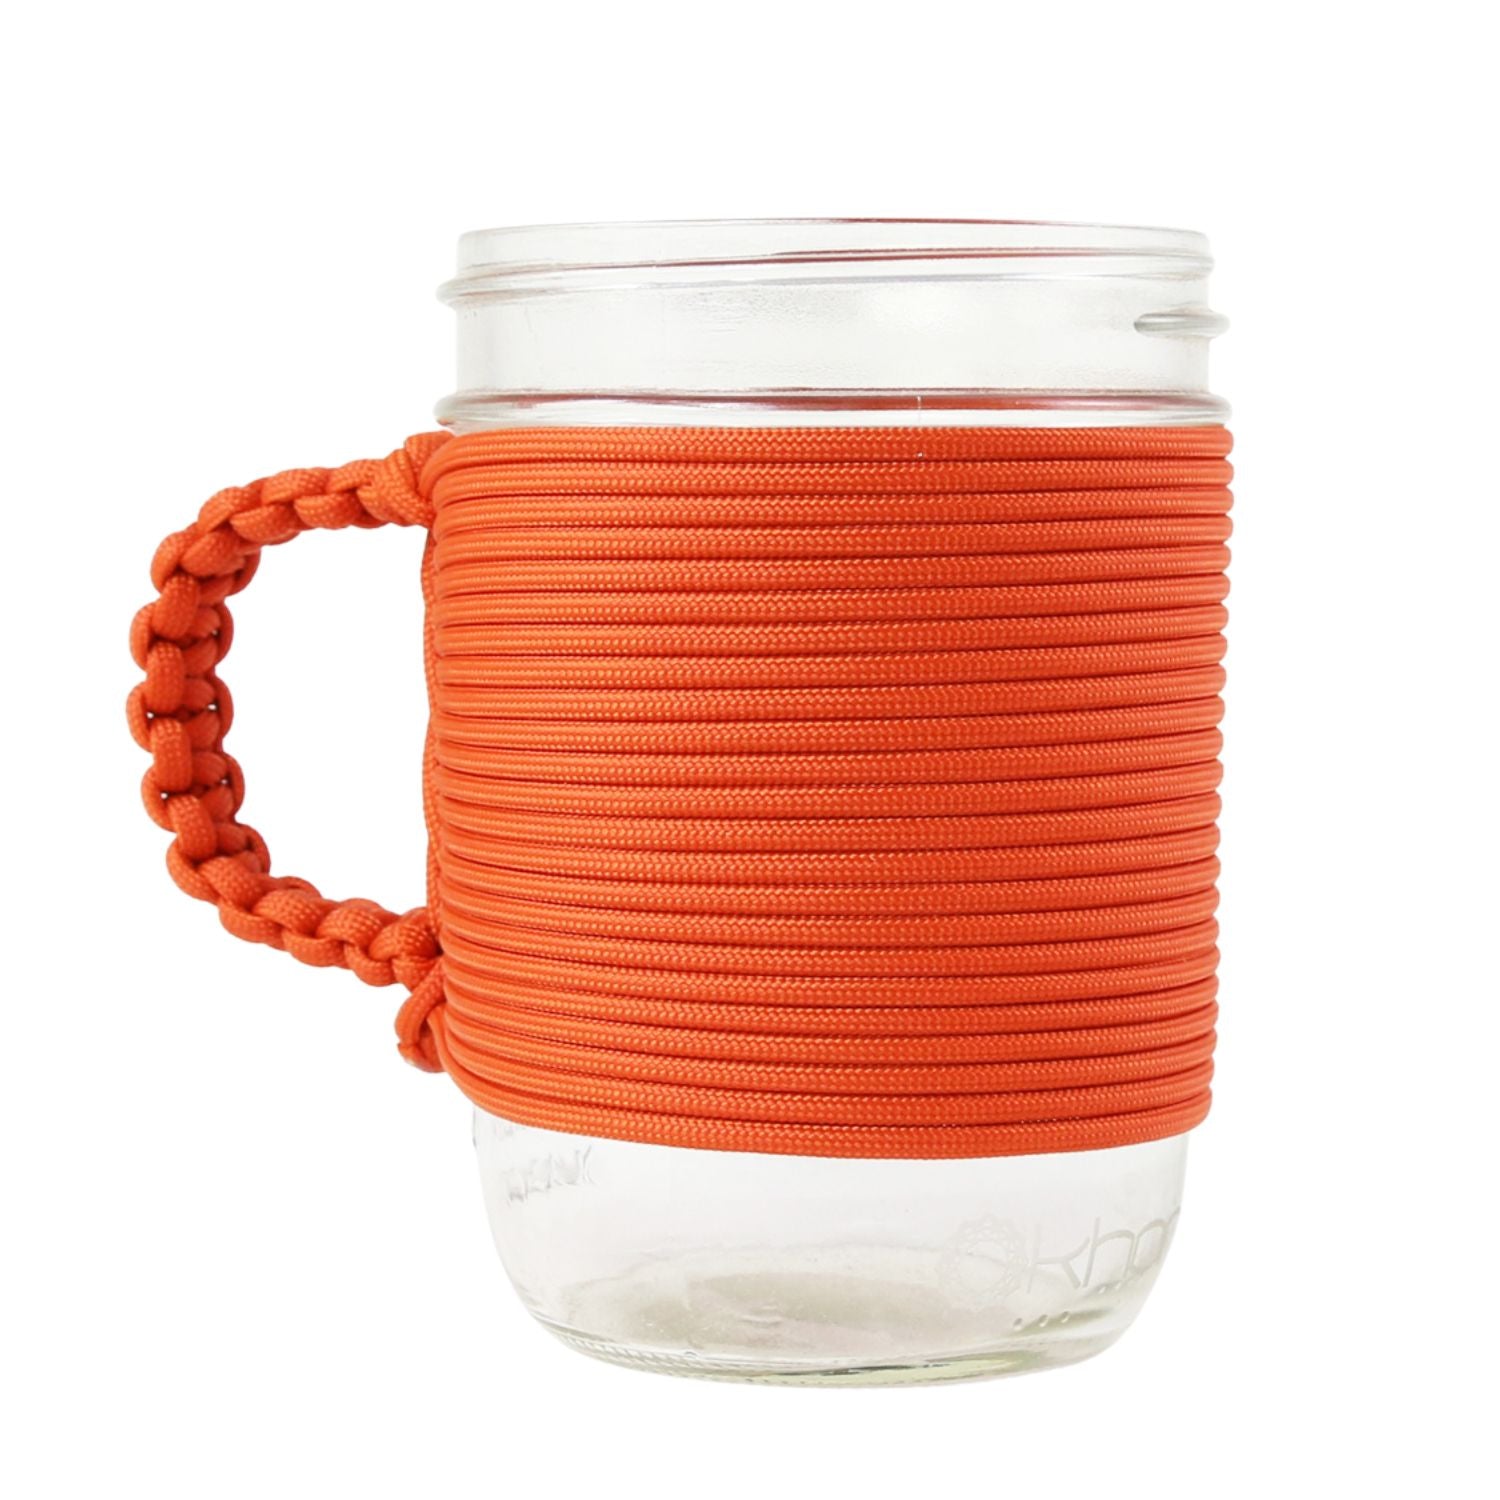 Handcrafted Paracord Tumbler Handle, Orange and Black